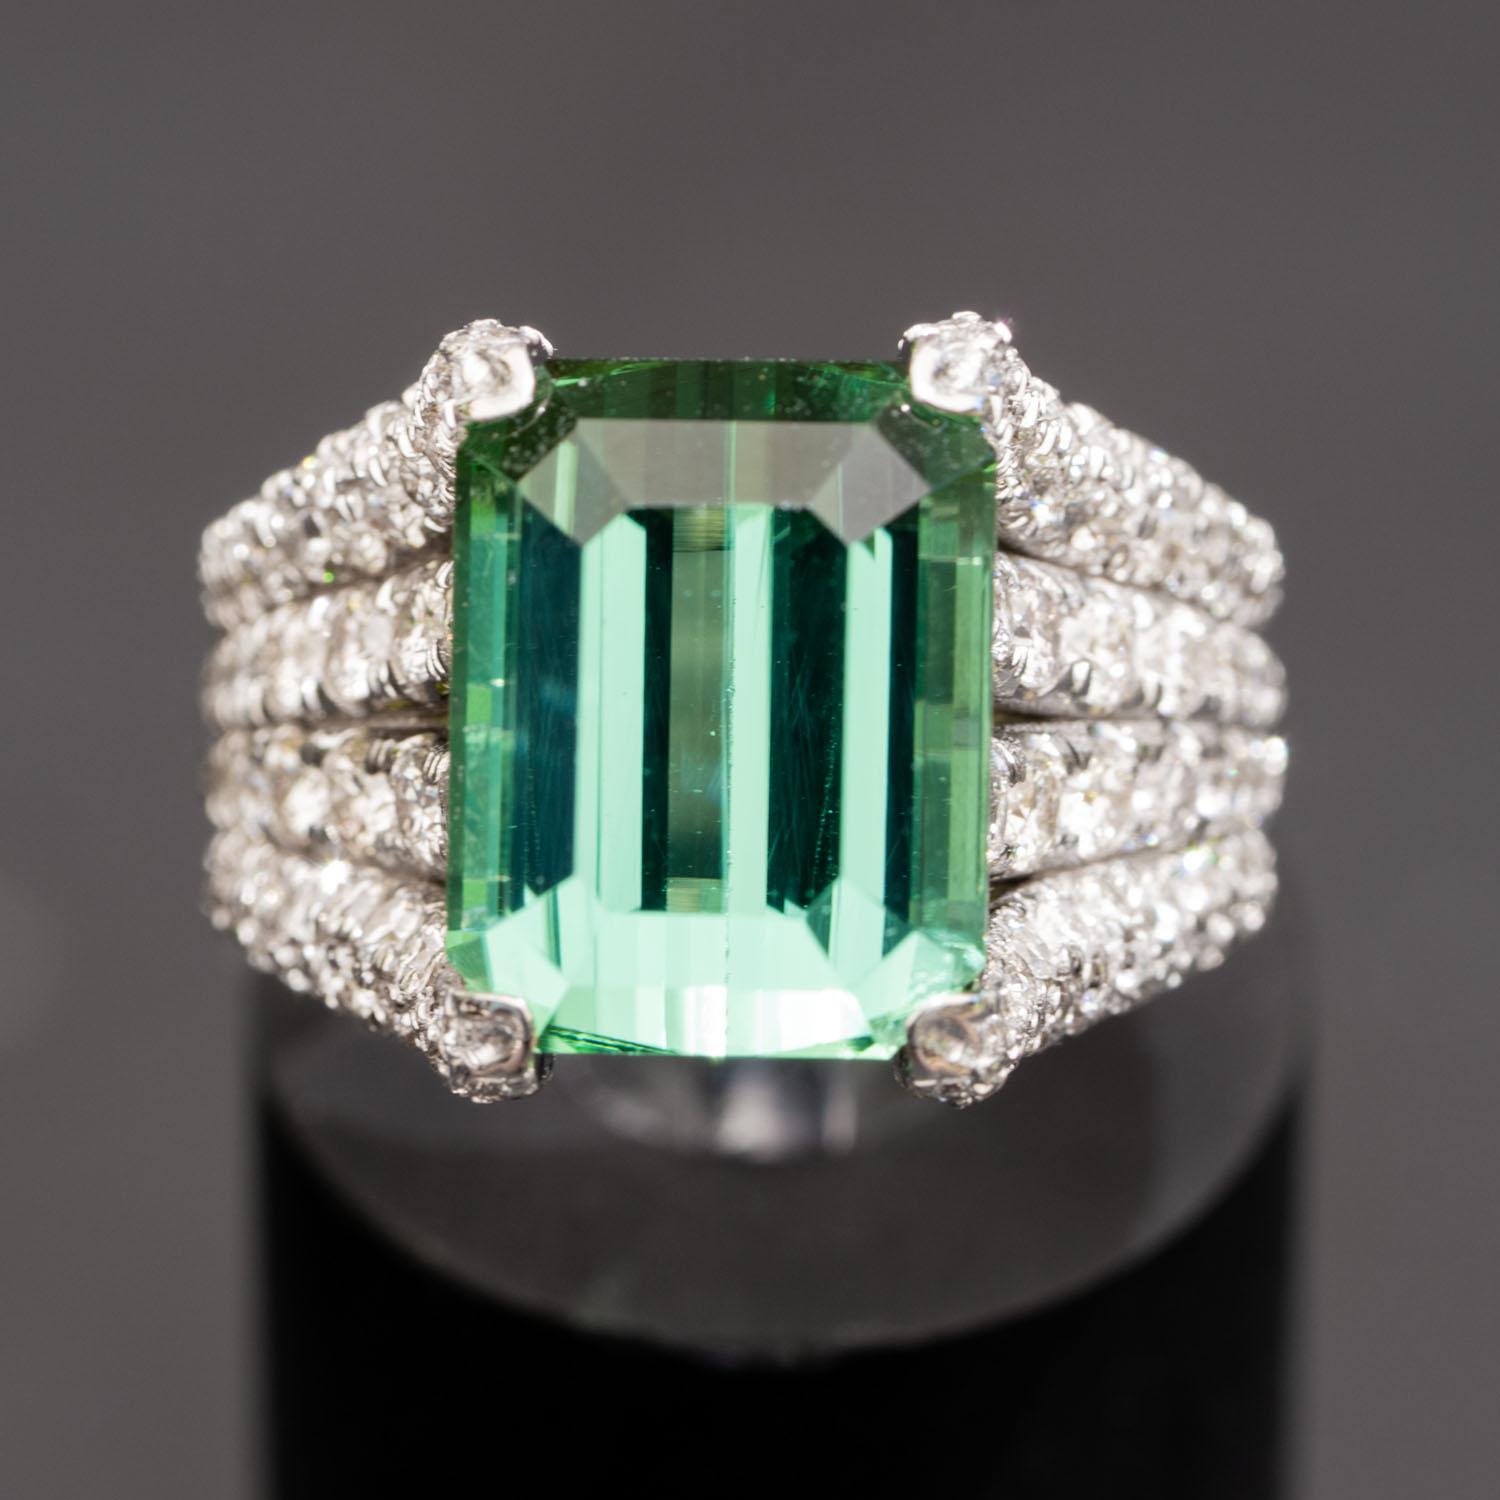 This 7.32 carat natural tourmaline diamond ring brings a lush touch of color to your fine jewelry collection, and surrounds it with 1.92 carats of natural VS sparkling diamonds along the outer band. The emerald shape of the large natural gem of the